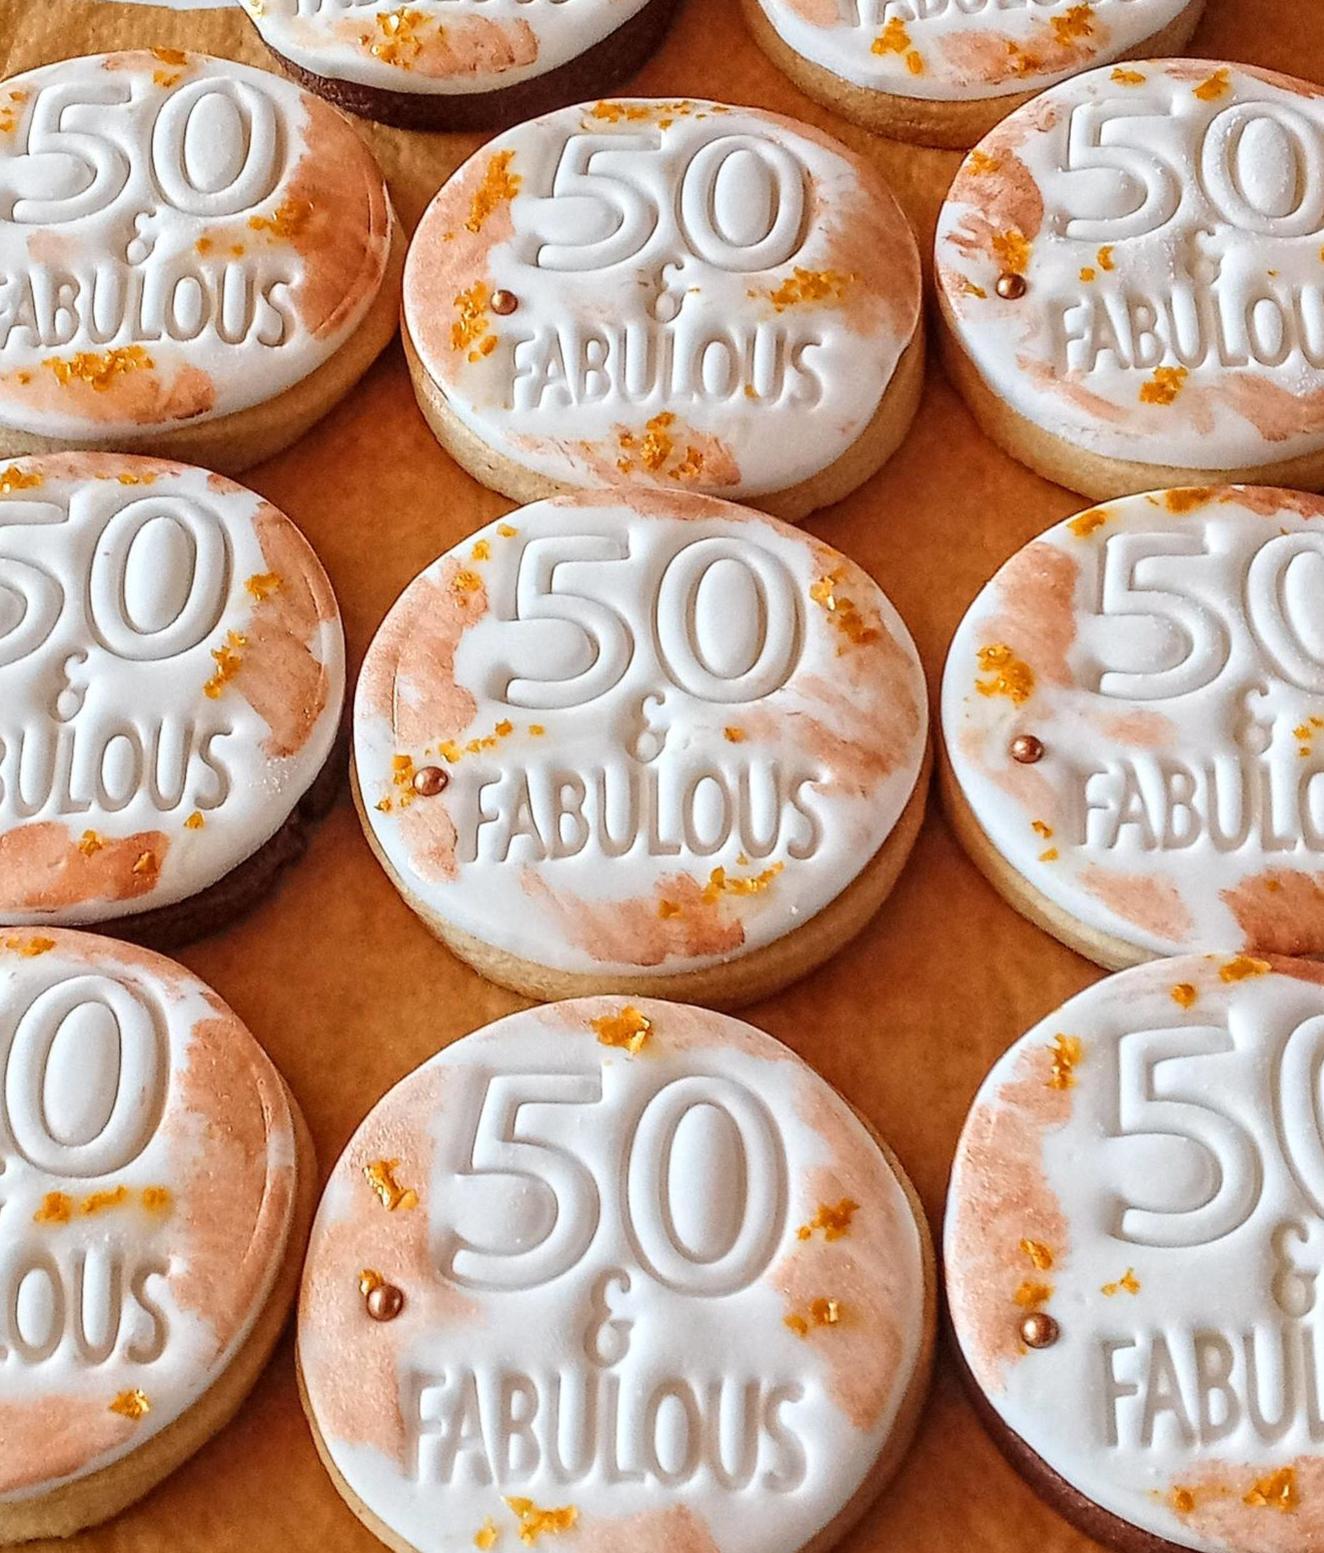 "50 and fabulous" iced cookies